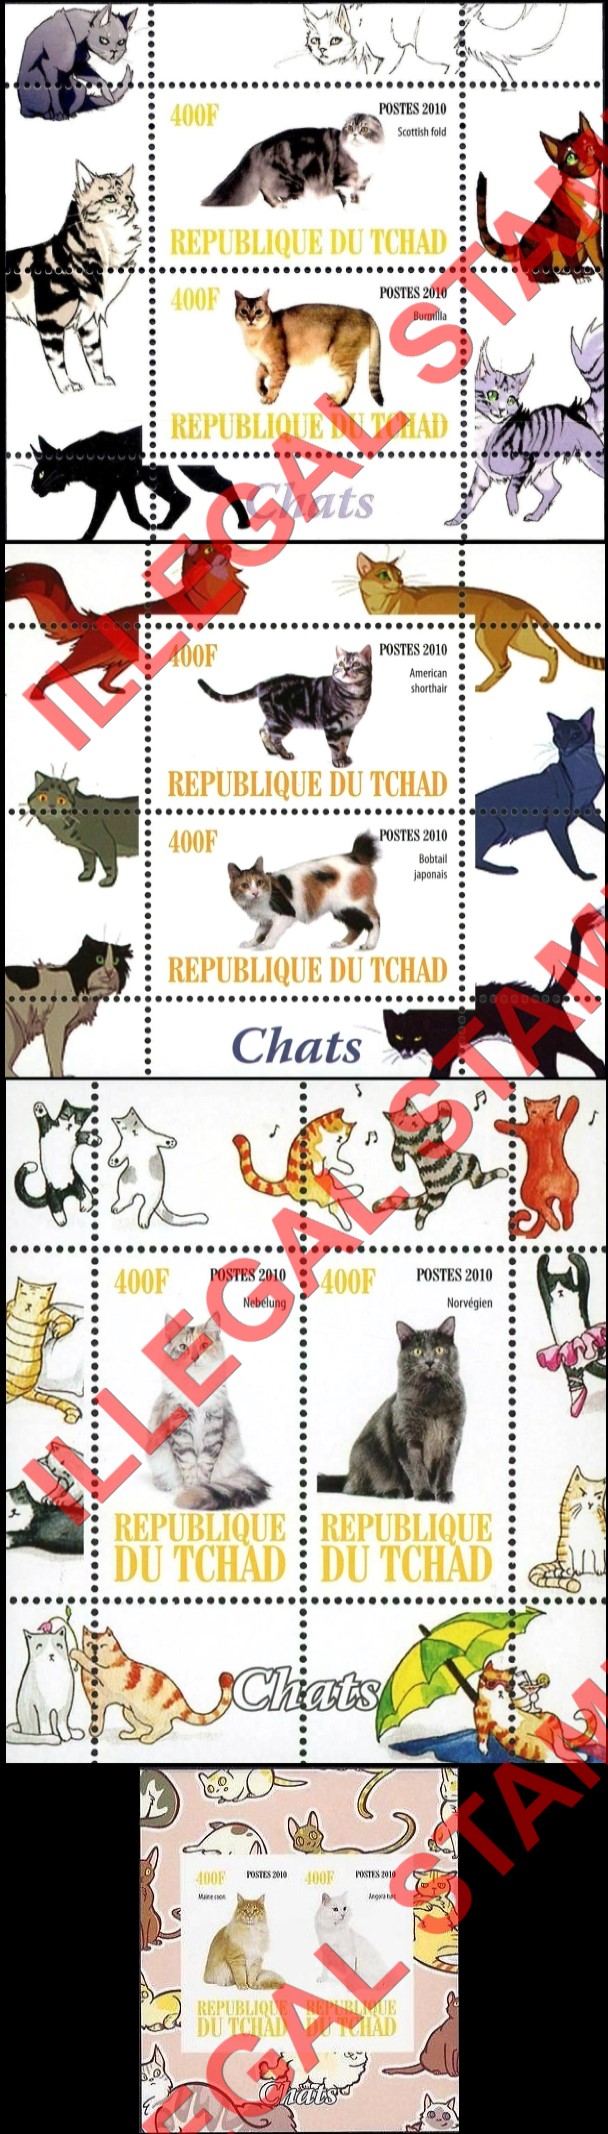 Chad 2010 Cats Illegal Stamps in Souvenir Sheets of 2